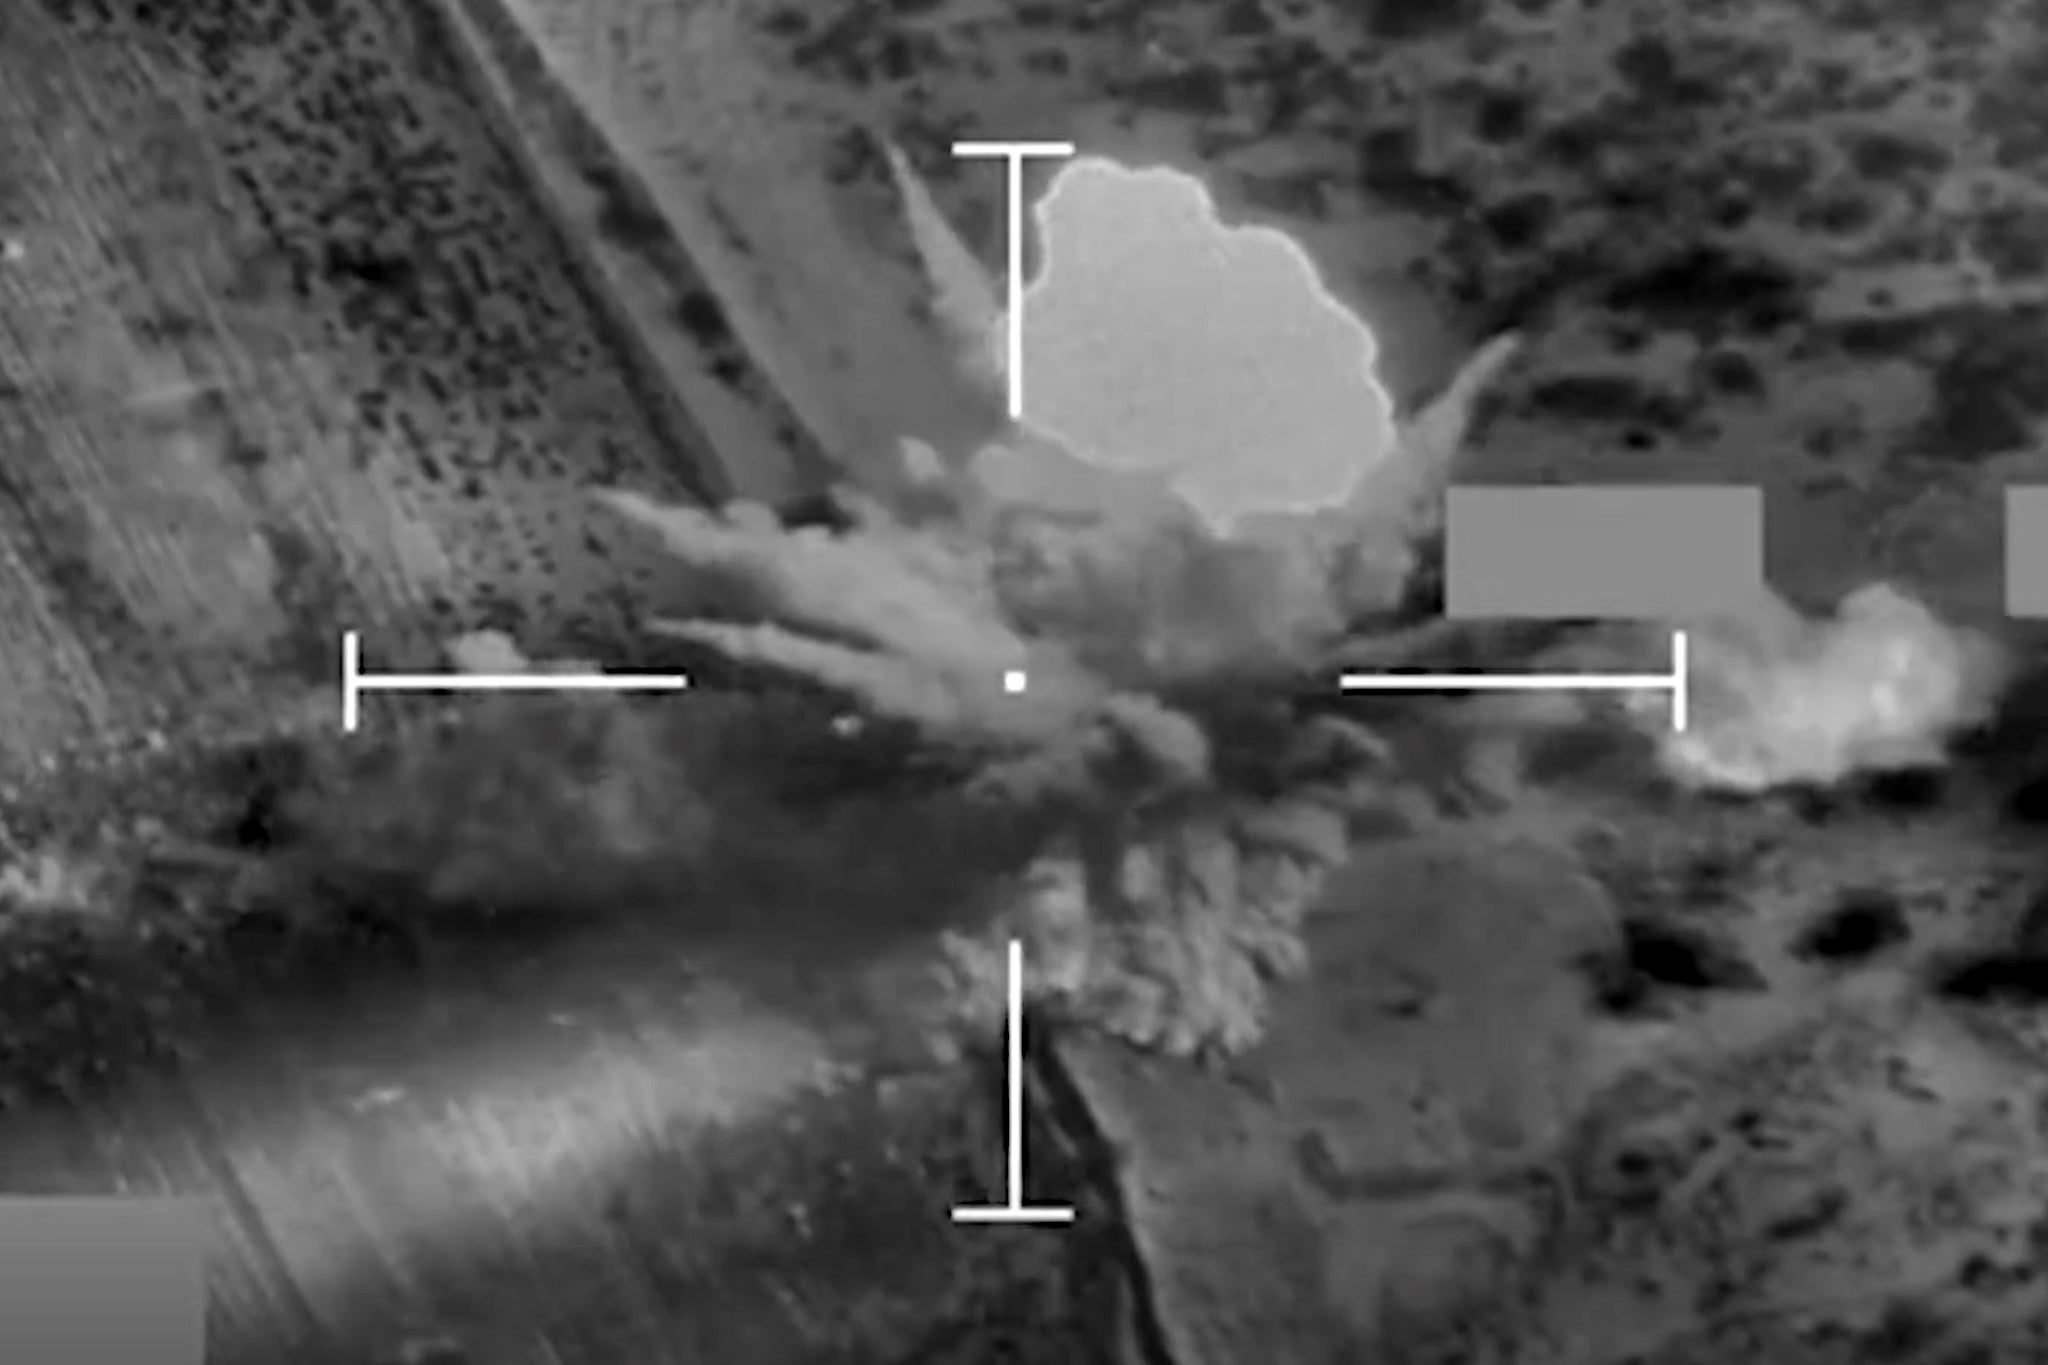 Footage released by the UK MoD shows strikes on Houthi positions in Yemen